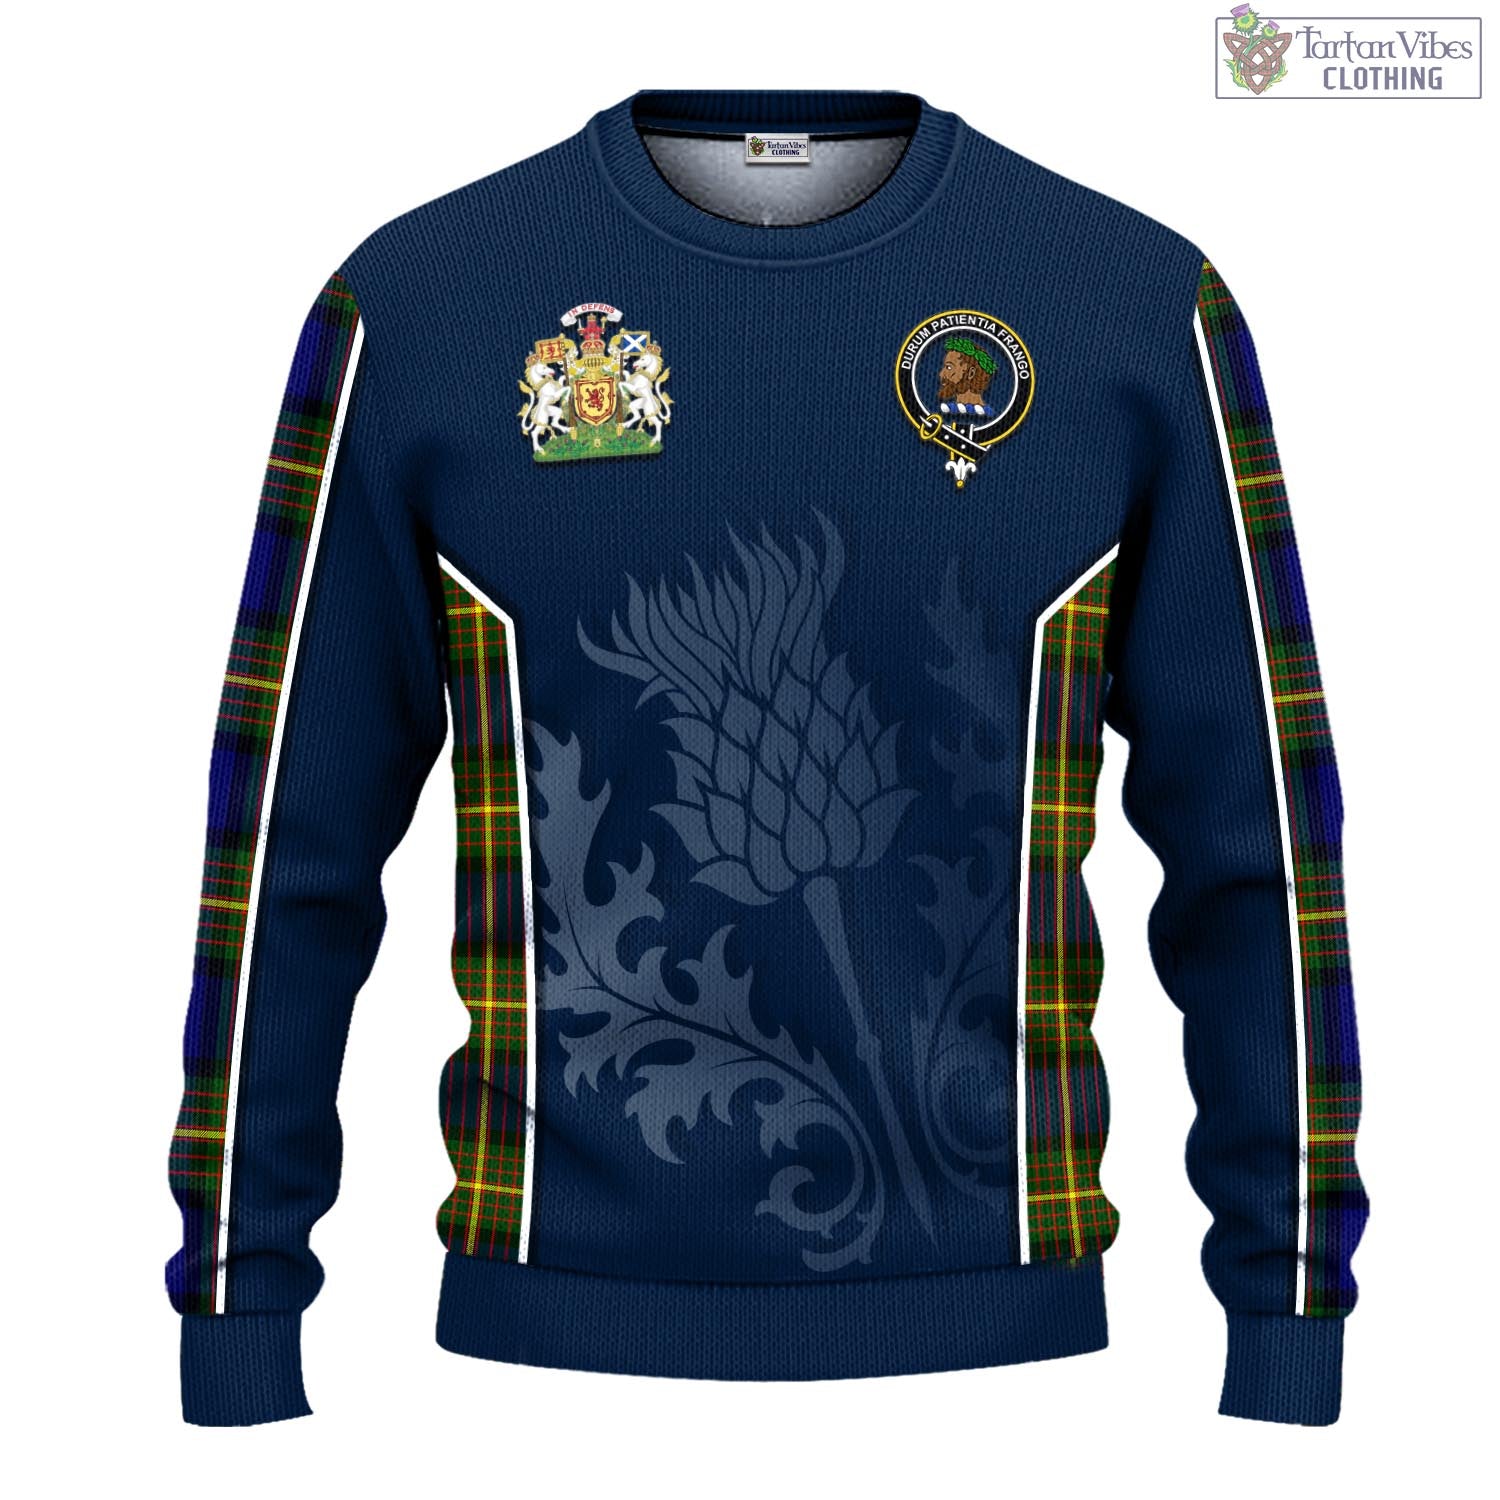 Tartan Vibes Clothing Moore Tartan Knitted Sweatshirt with Family Crest and Scottish Thistle Vibes Sport Style